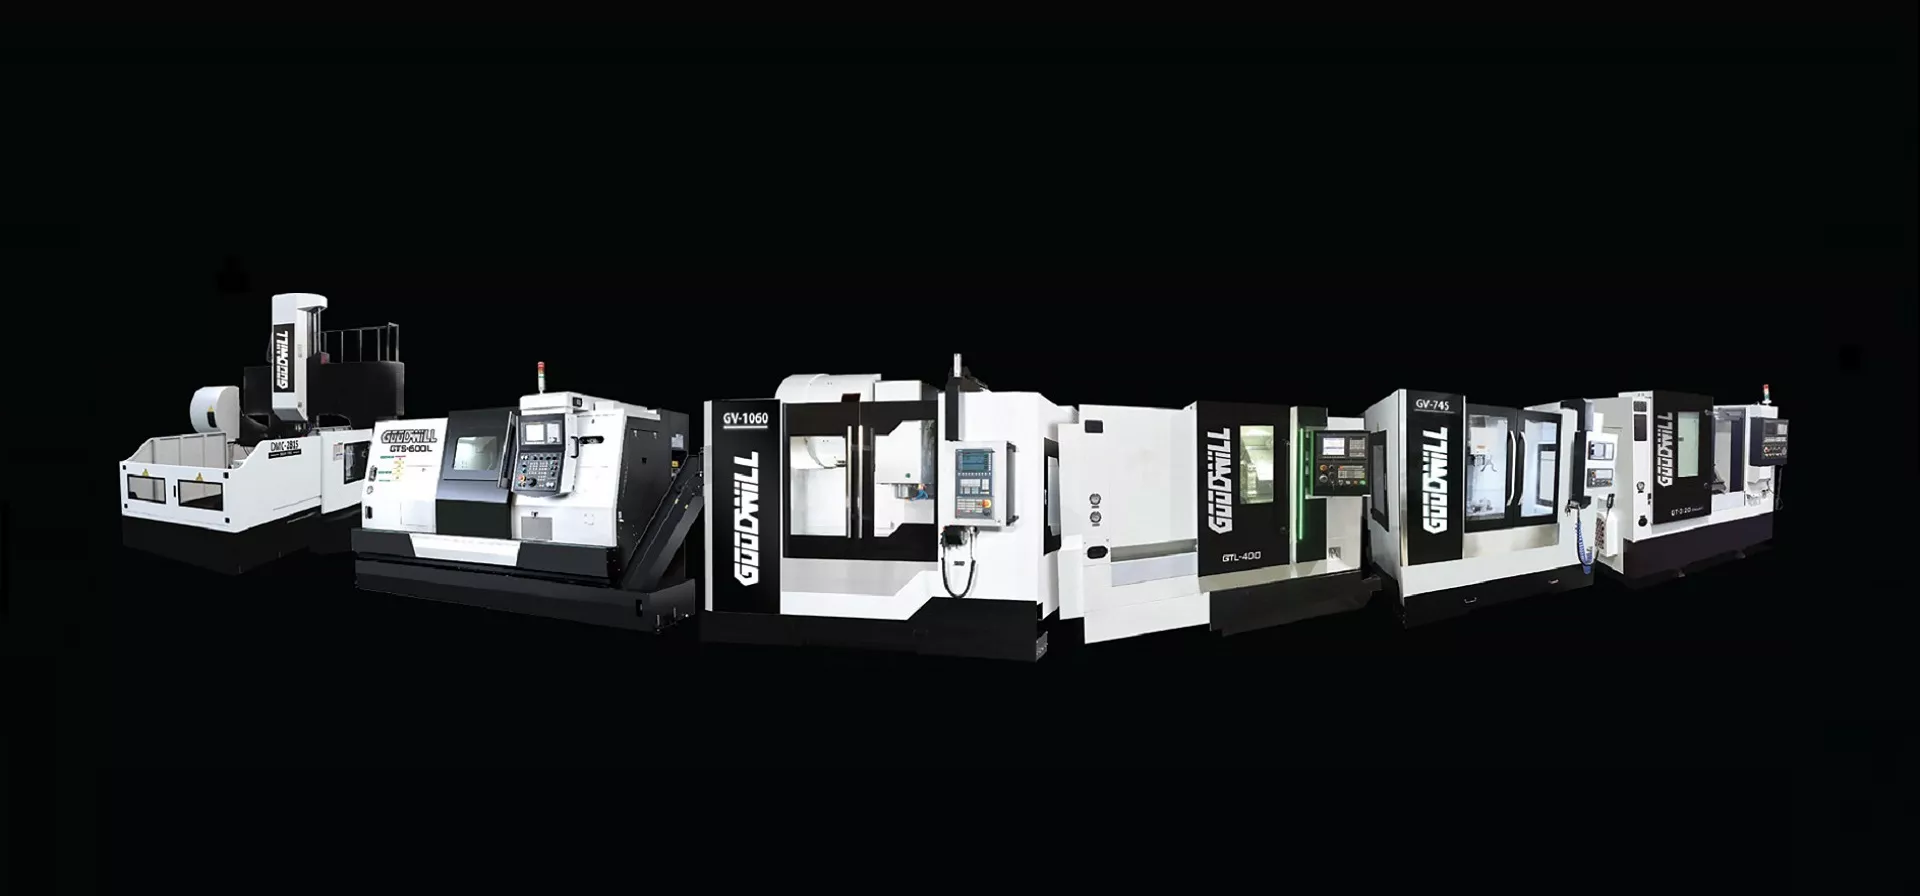 Goodwill design, bulid and service a full range of <br>  machining centers and turning centers